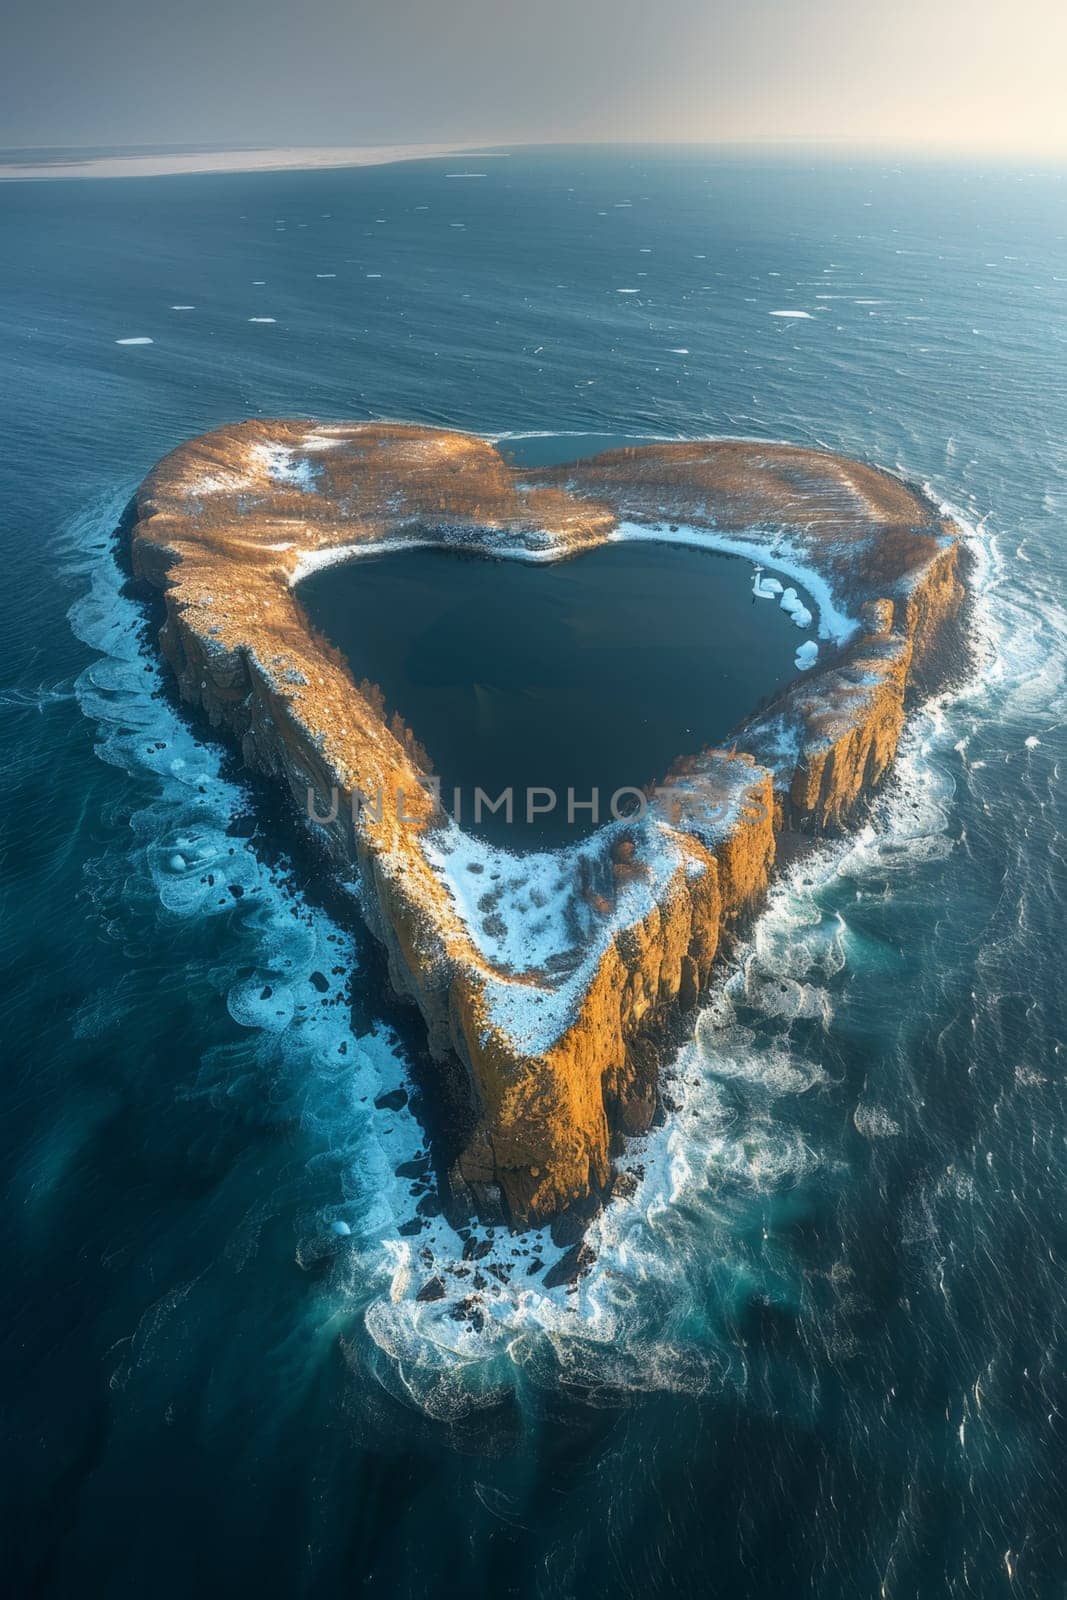 An island in the sea in the shape of a heart by Lobachad